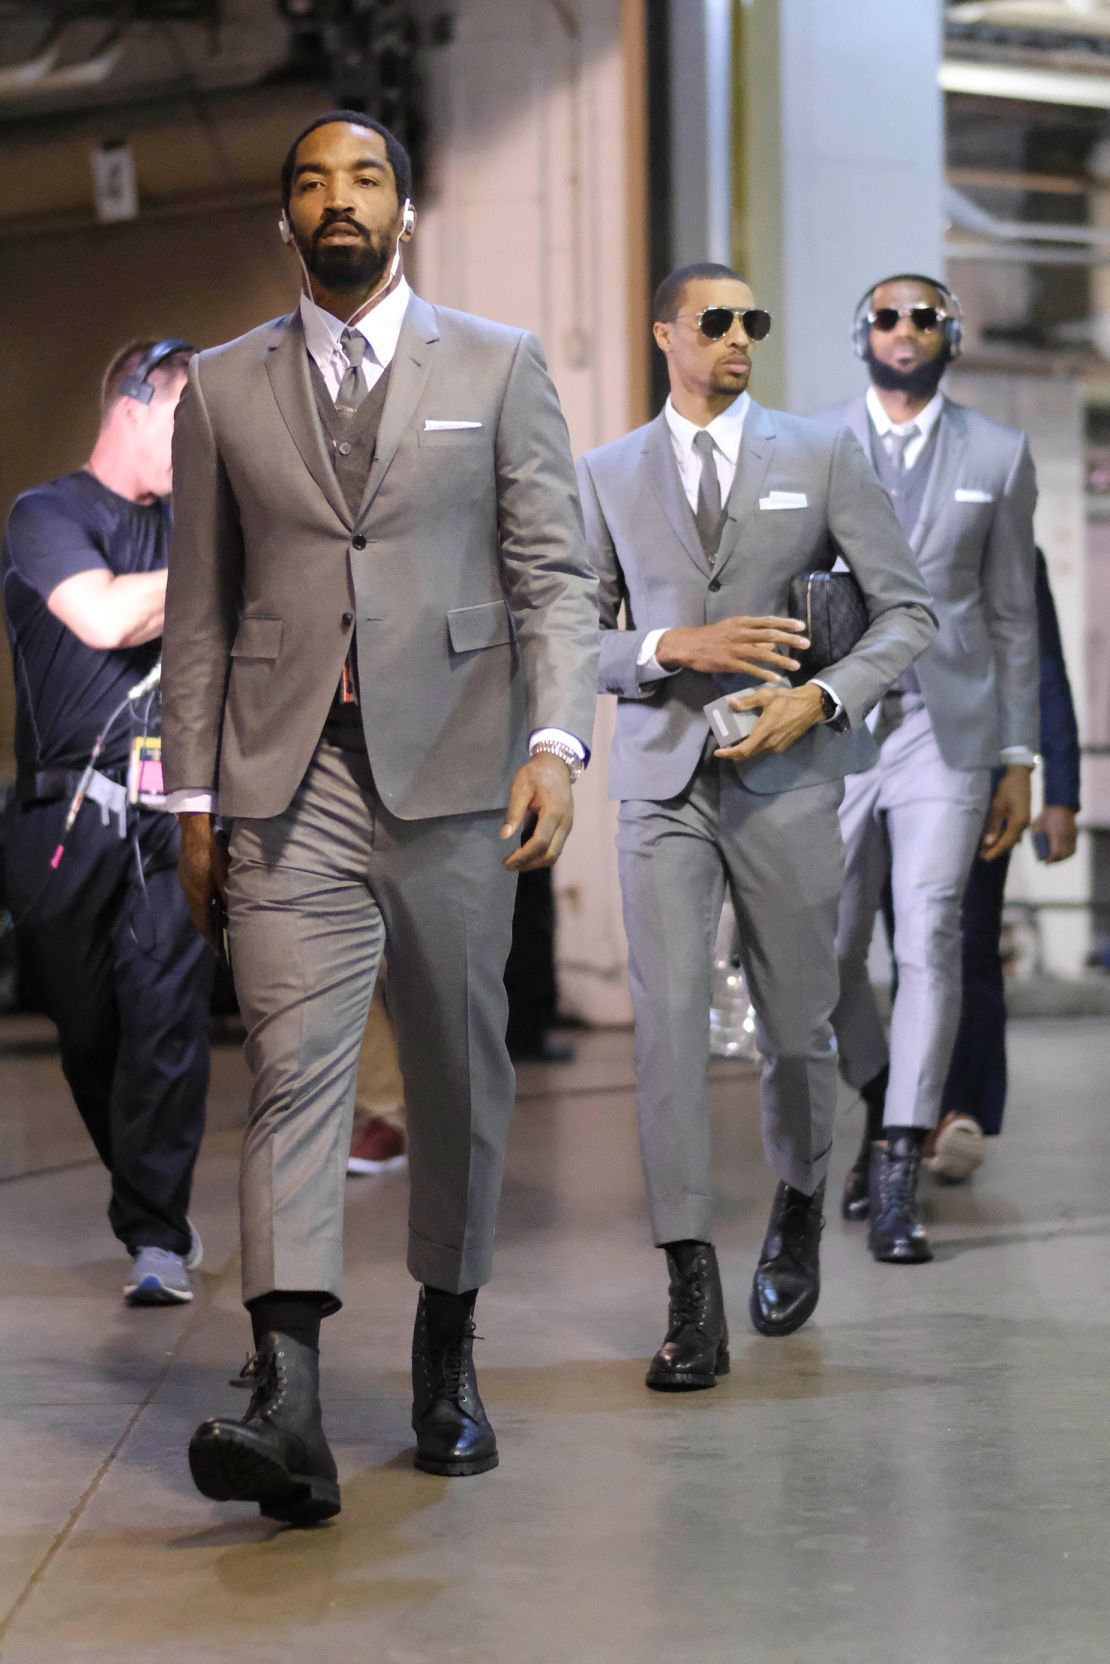 GQ Sports director Sam Schube highlights the Cleveland Cavaliers' custom Thom Browne suits — ordered for the team by LeBron James in 2018 — as a particular highlight in basketball fashions.